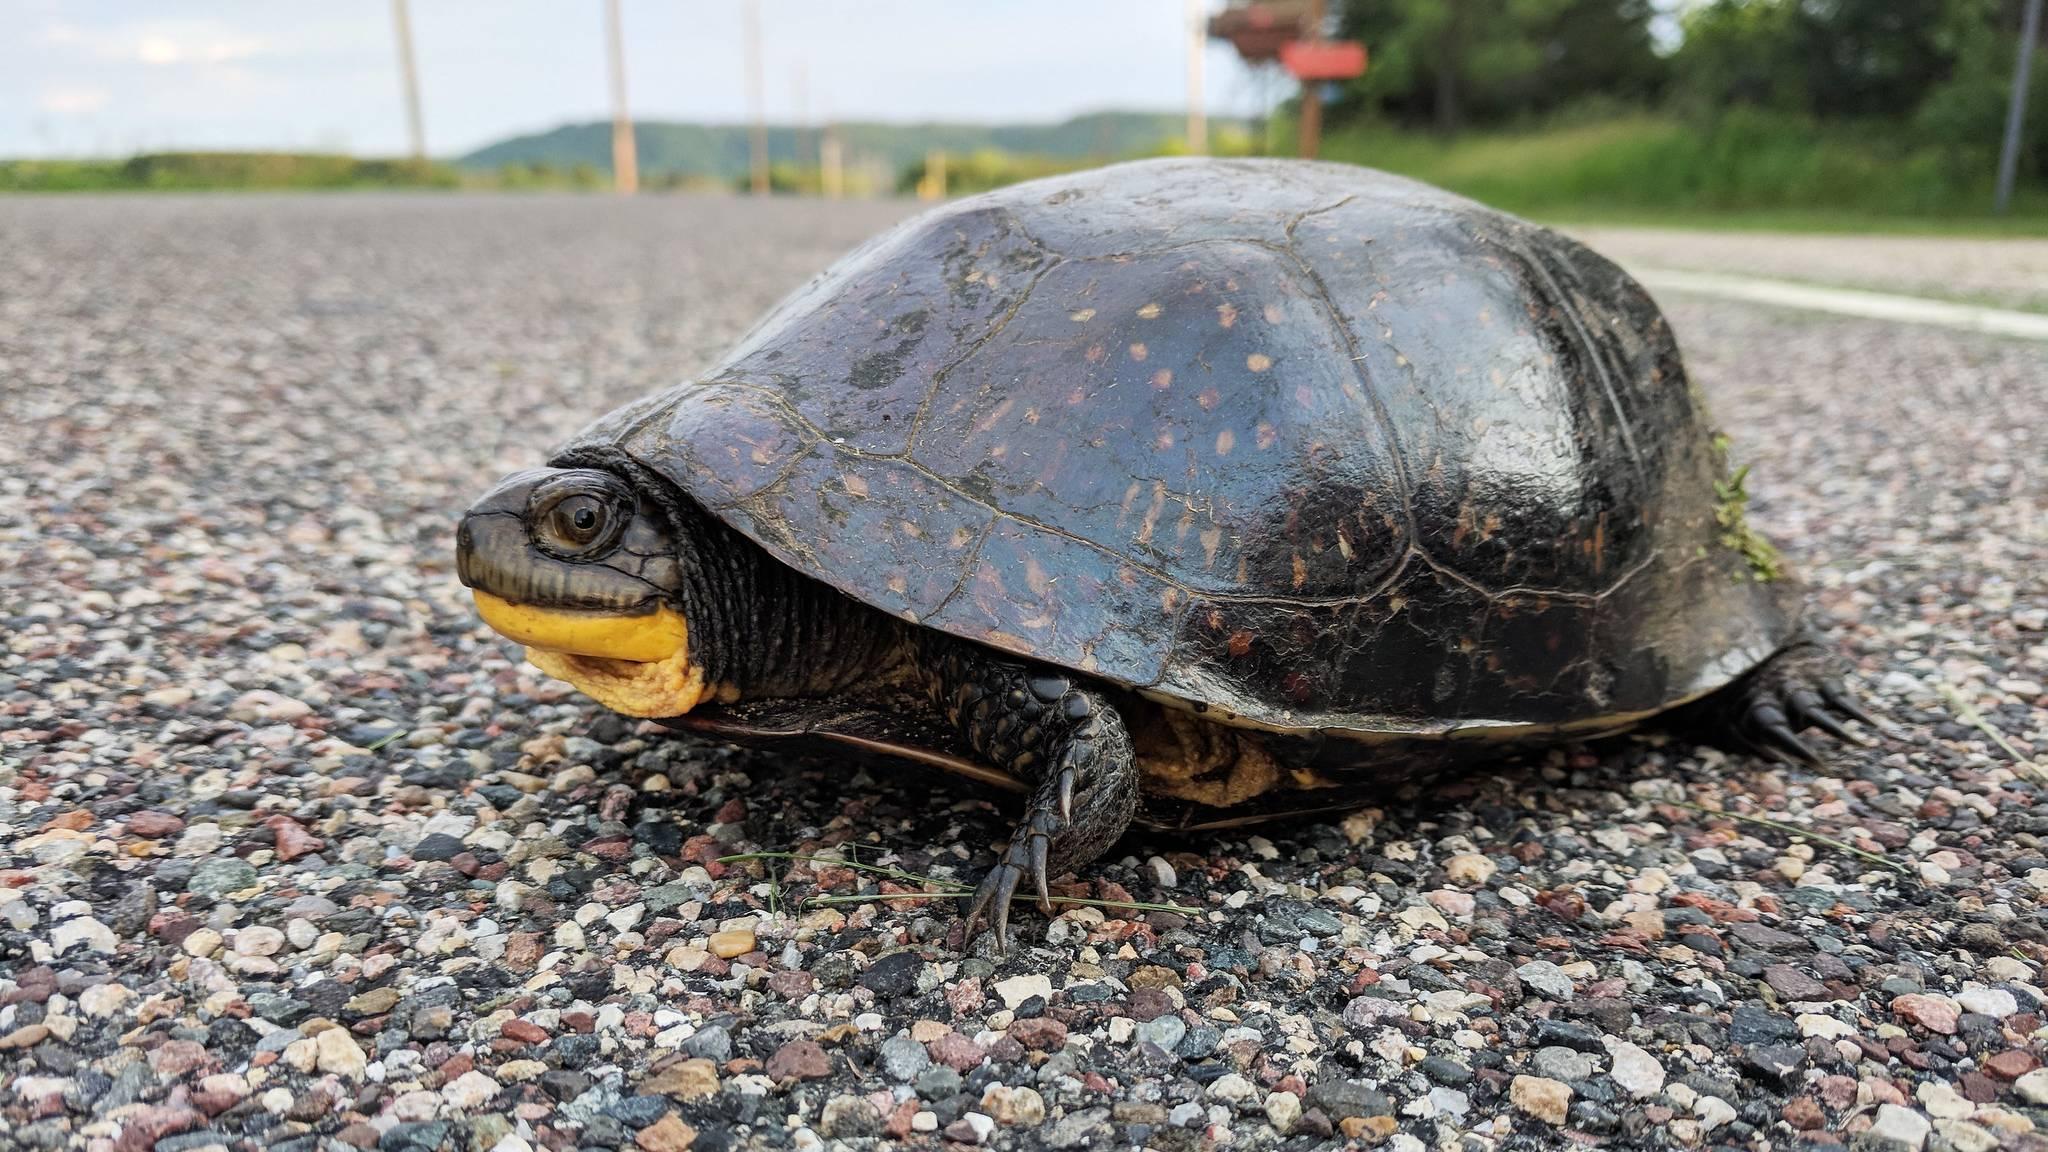 Endangered Blanding's turtles are among the native species on the move this time of year. (USFWS Midwest Region / Courtney Celley / Flickr Creative Commons)